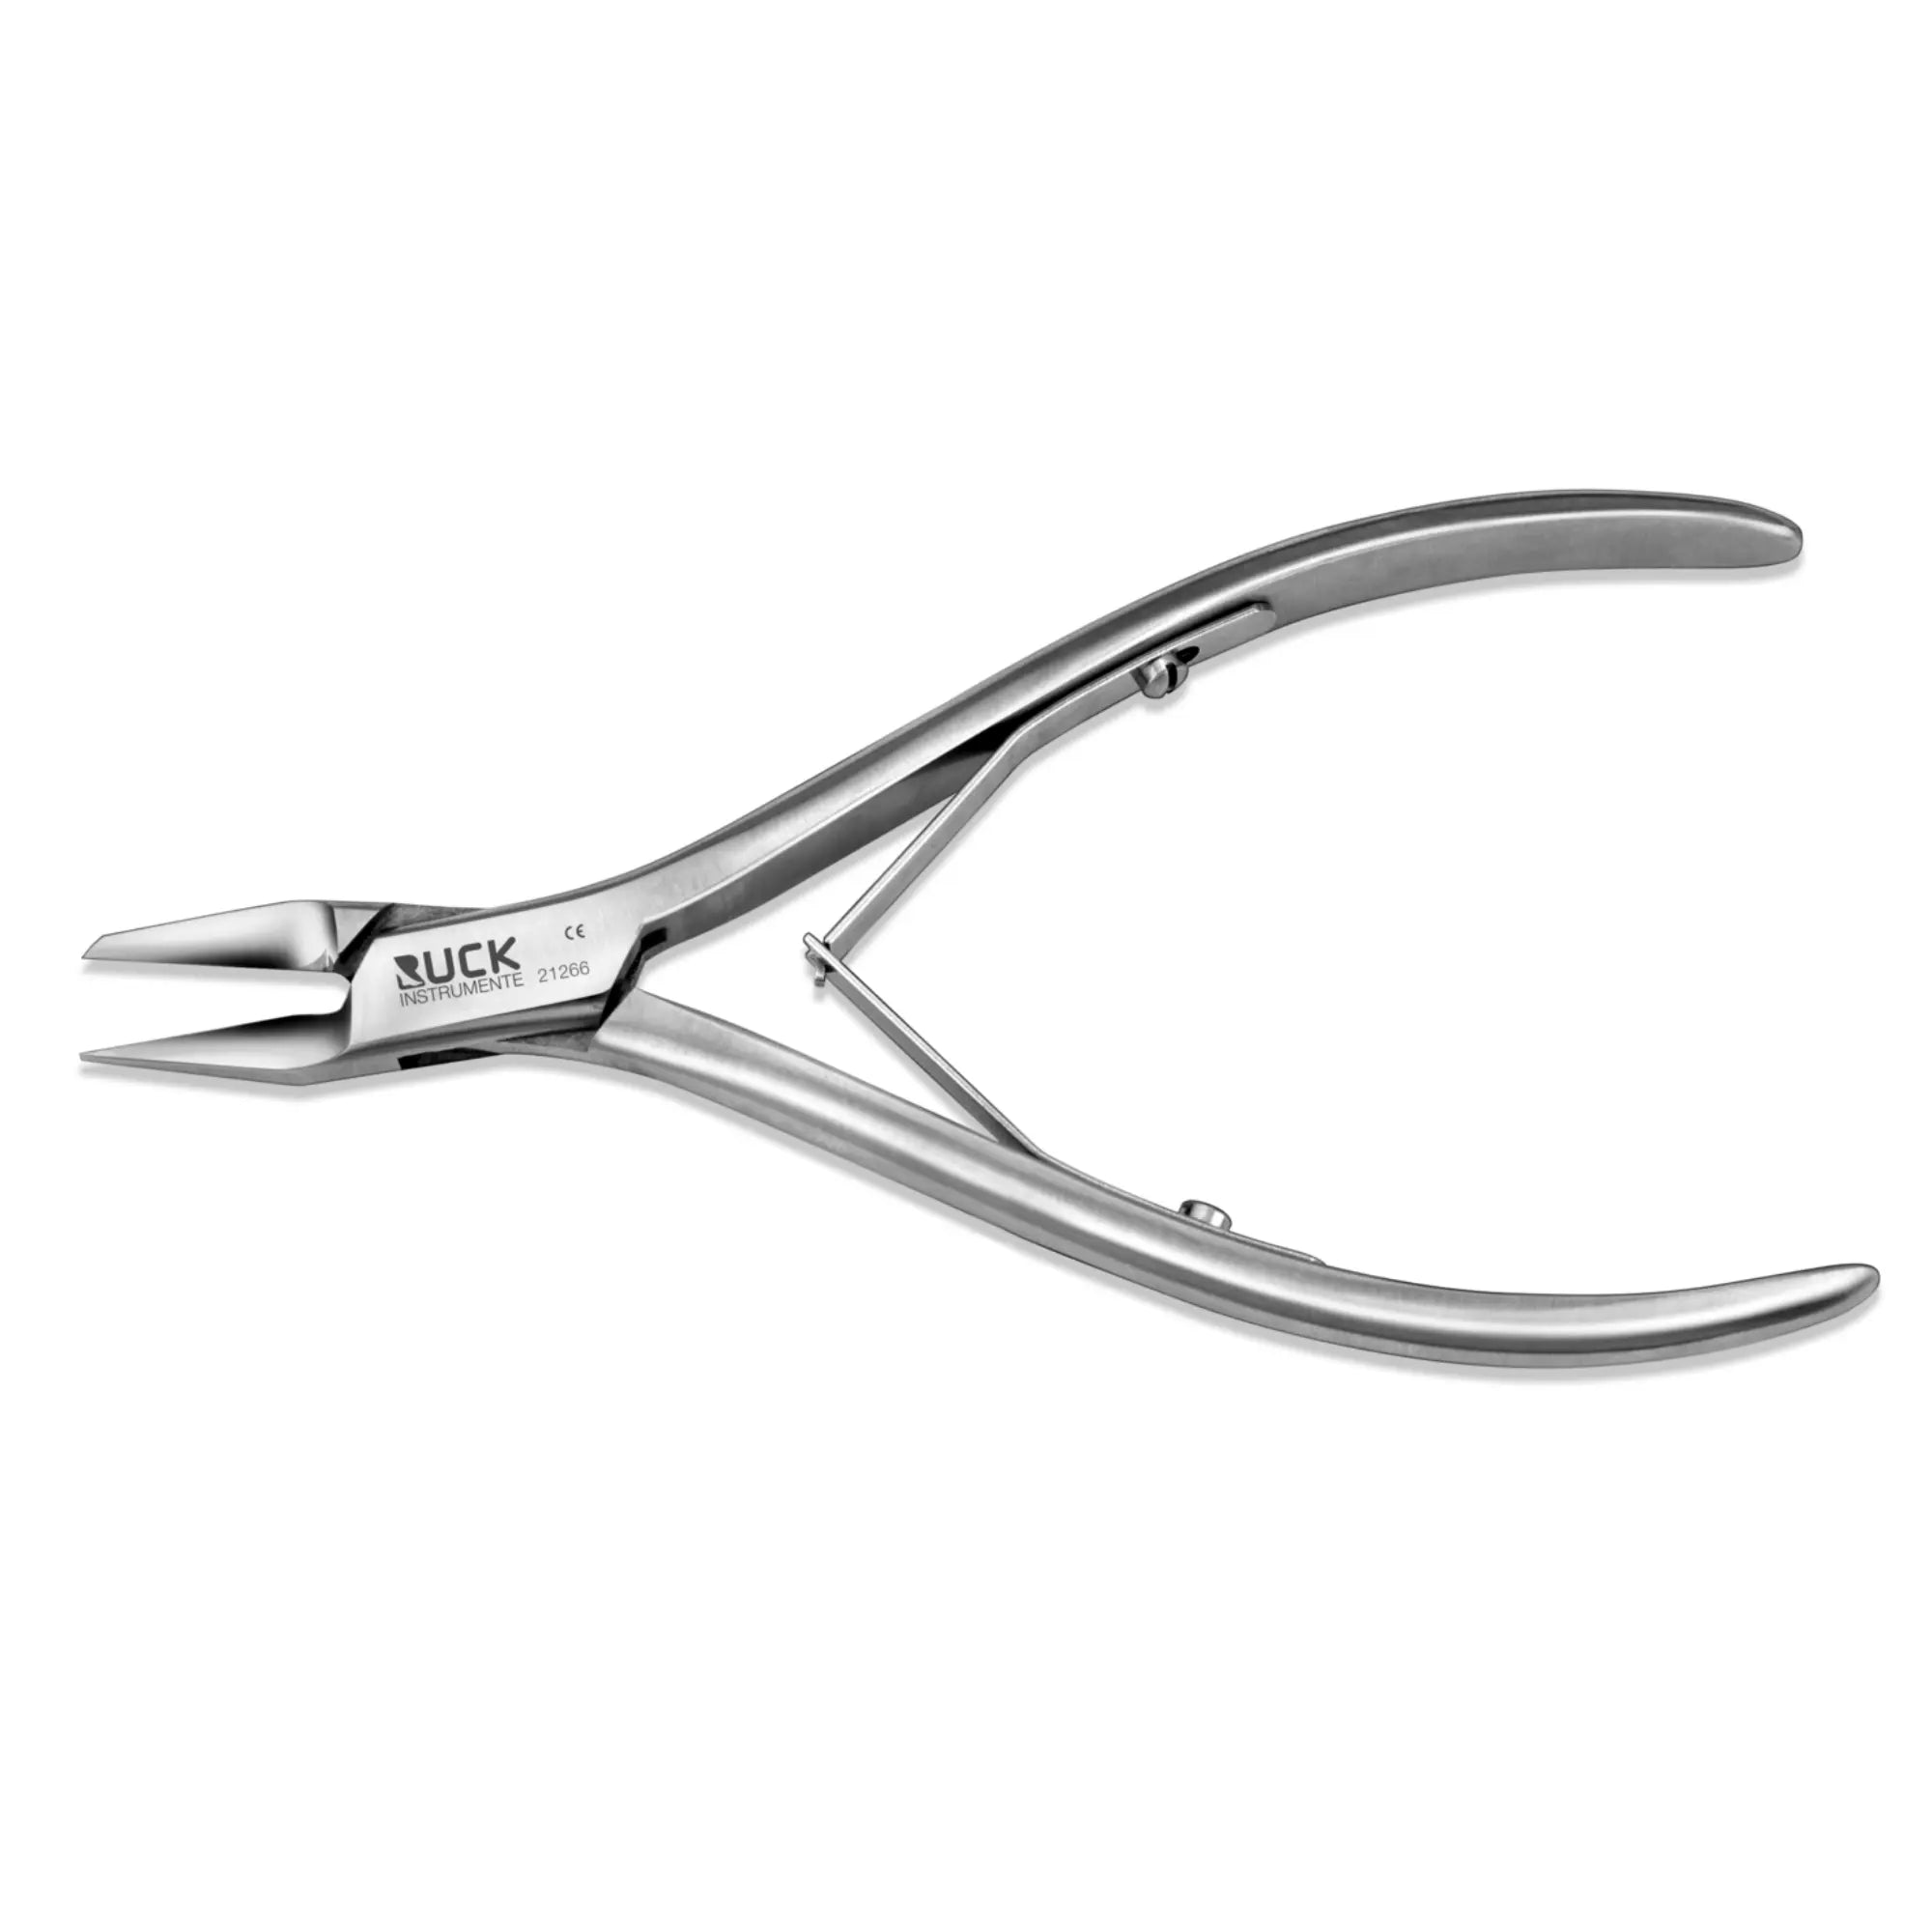 Pince à ongles - Coupe droite 21 mm - Mors plats - 13,5 cm - Ruck Ruck